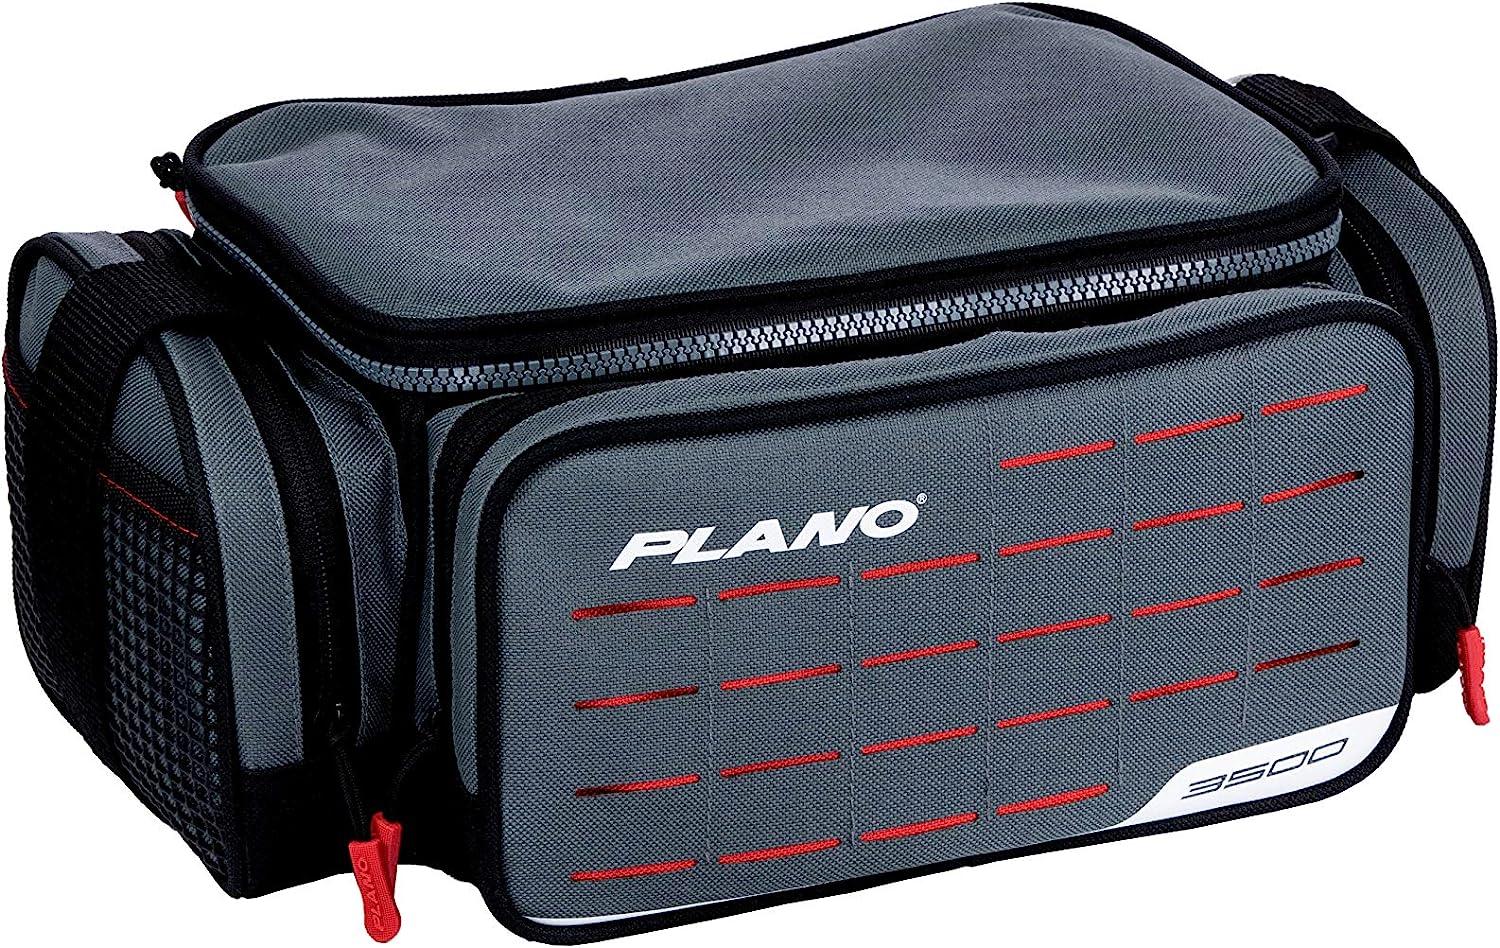 Plano Weekend Series 3500 Softsider Tackle Bag, Gray Fabric, Includes 2  3500 Stowaway Storage Boxes, Soft Fishing Tackle Bag for Baits & Lures,  Water-Resistant 3500 - Tackle Case